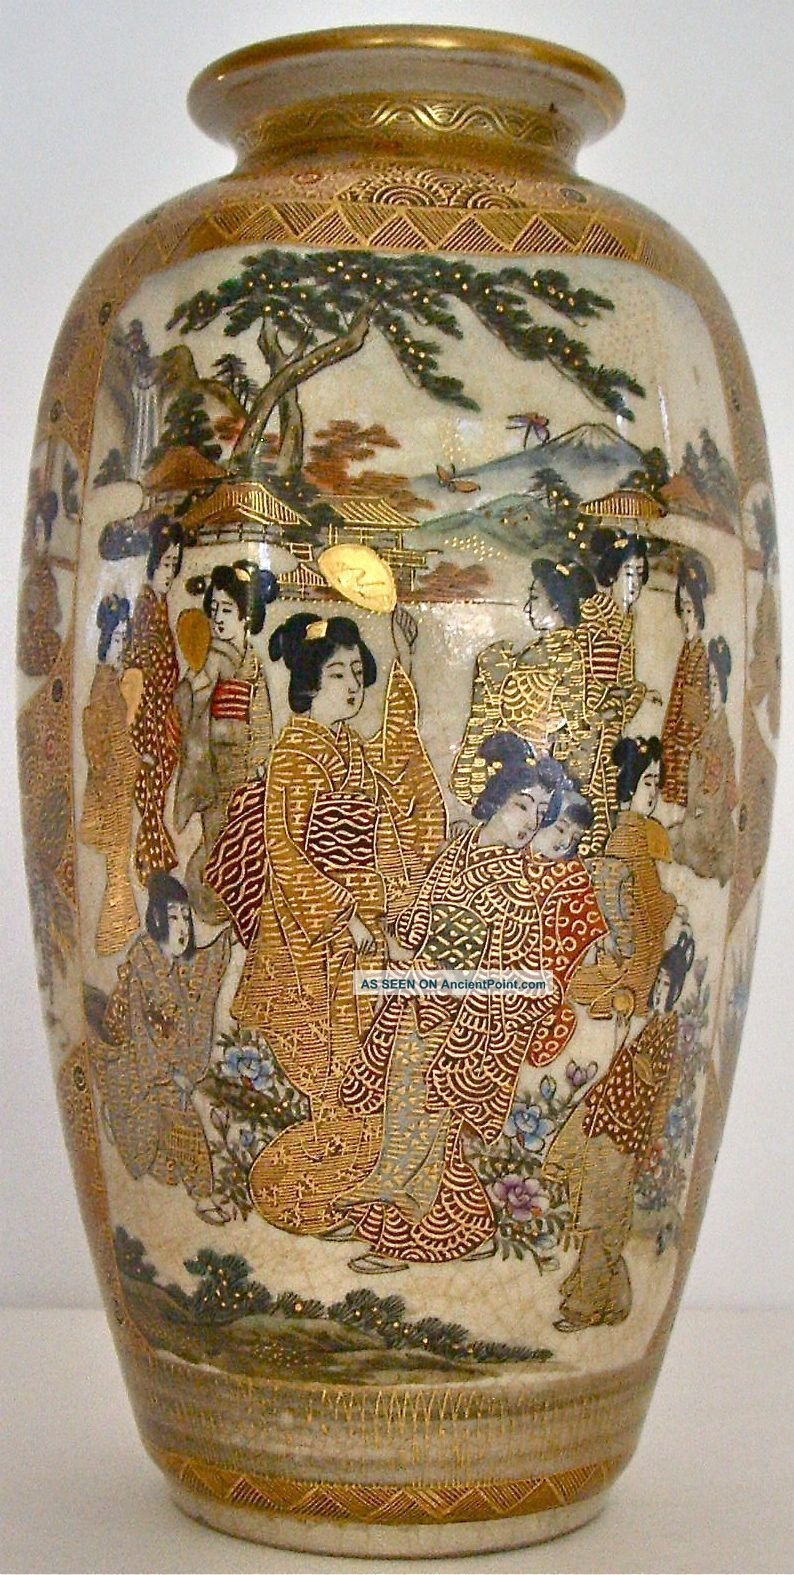 gold satsuma vase of list of synonyms and antonyms of the word satsuma antiques for antique satsuma ware japan miks pics japan l board http